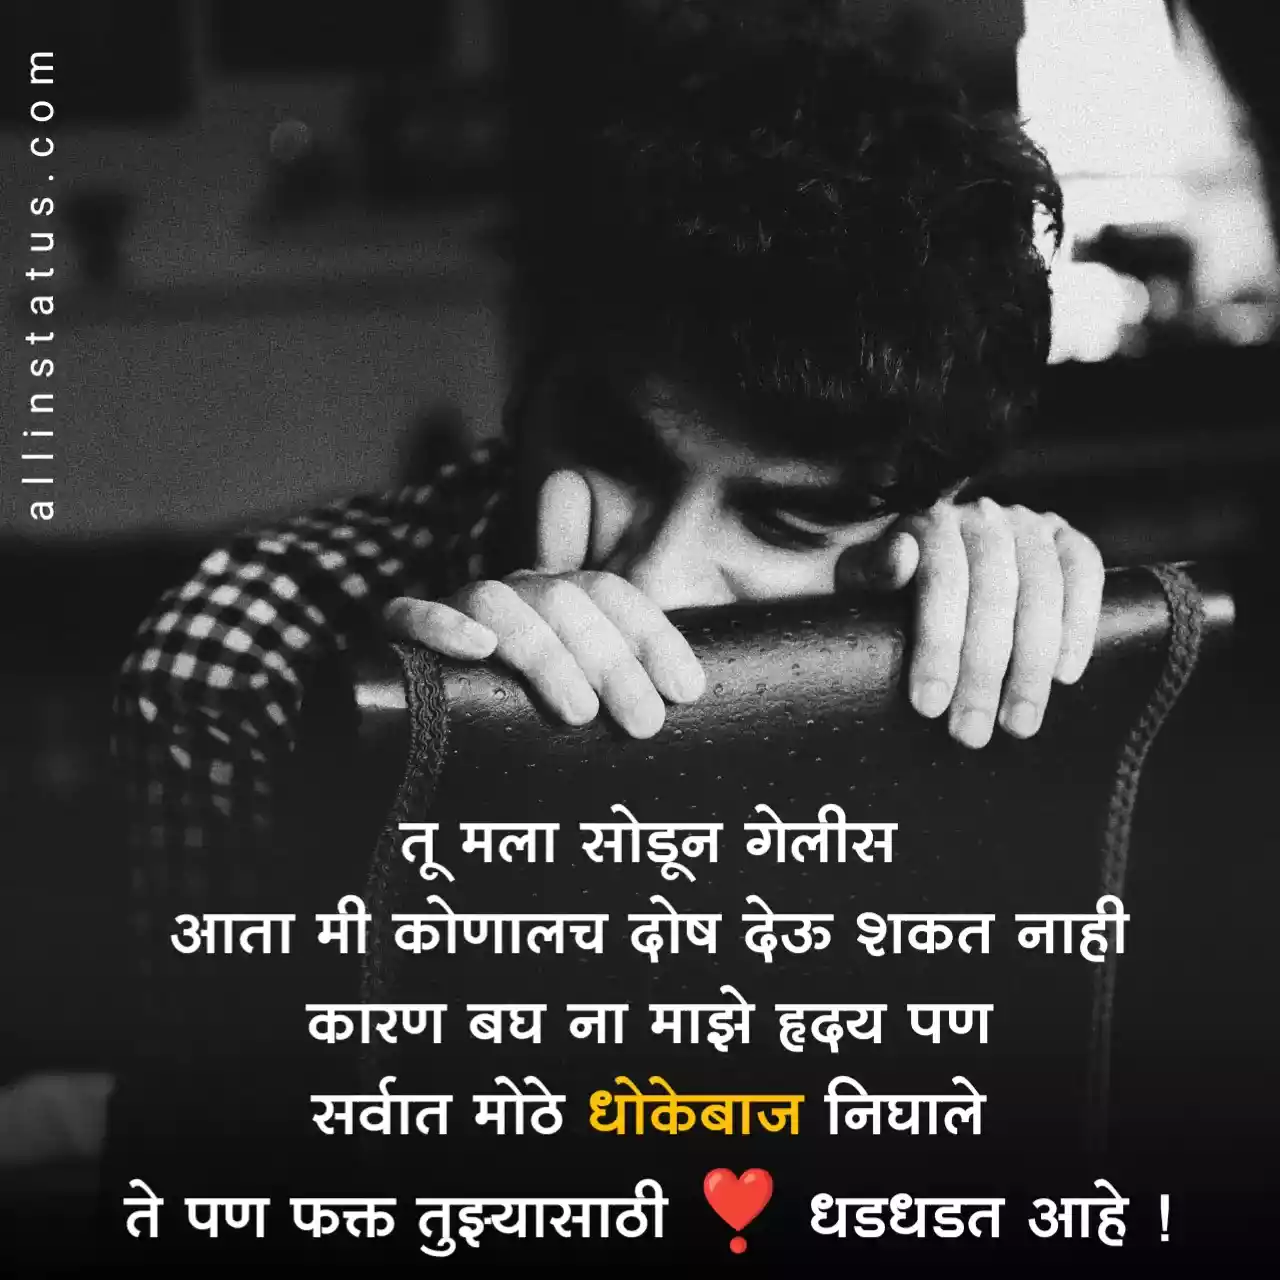 Sad love quotes in marathi for girlfriend 